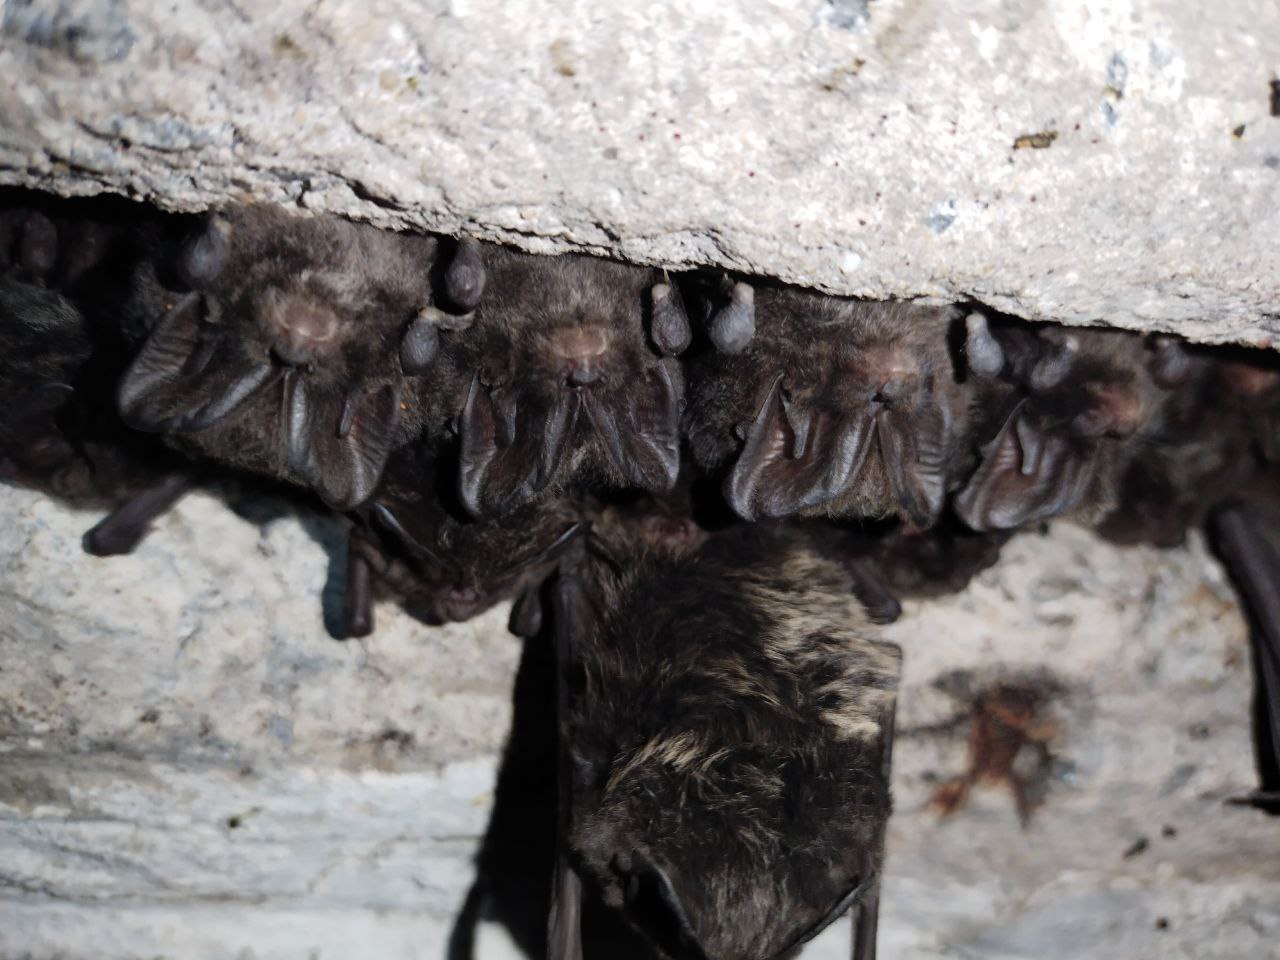 Rescue of more than 500 Barbastelle bats